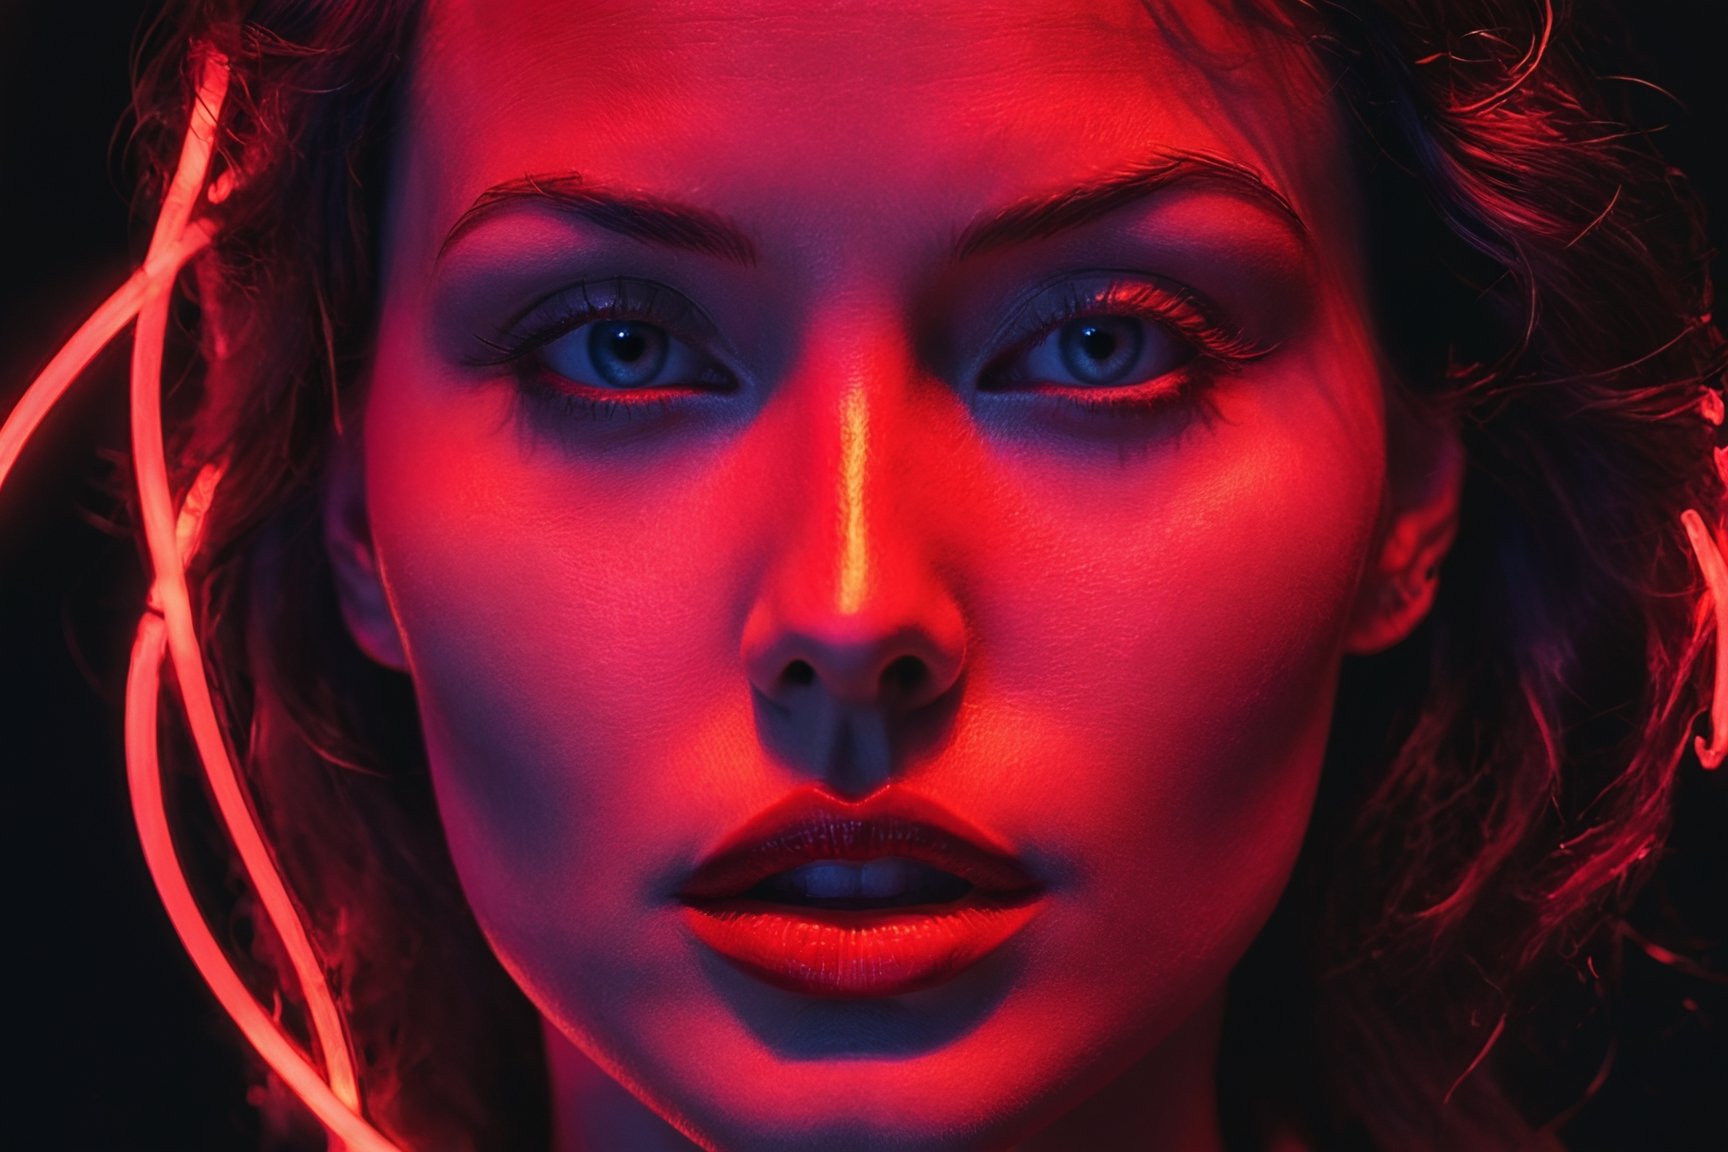 A woman's face in close-up, lit by intense red neon light outlining her fierce, enigmatic features with a focus on her eyes or lips